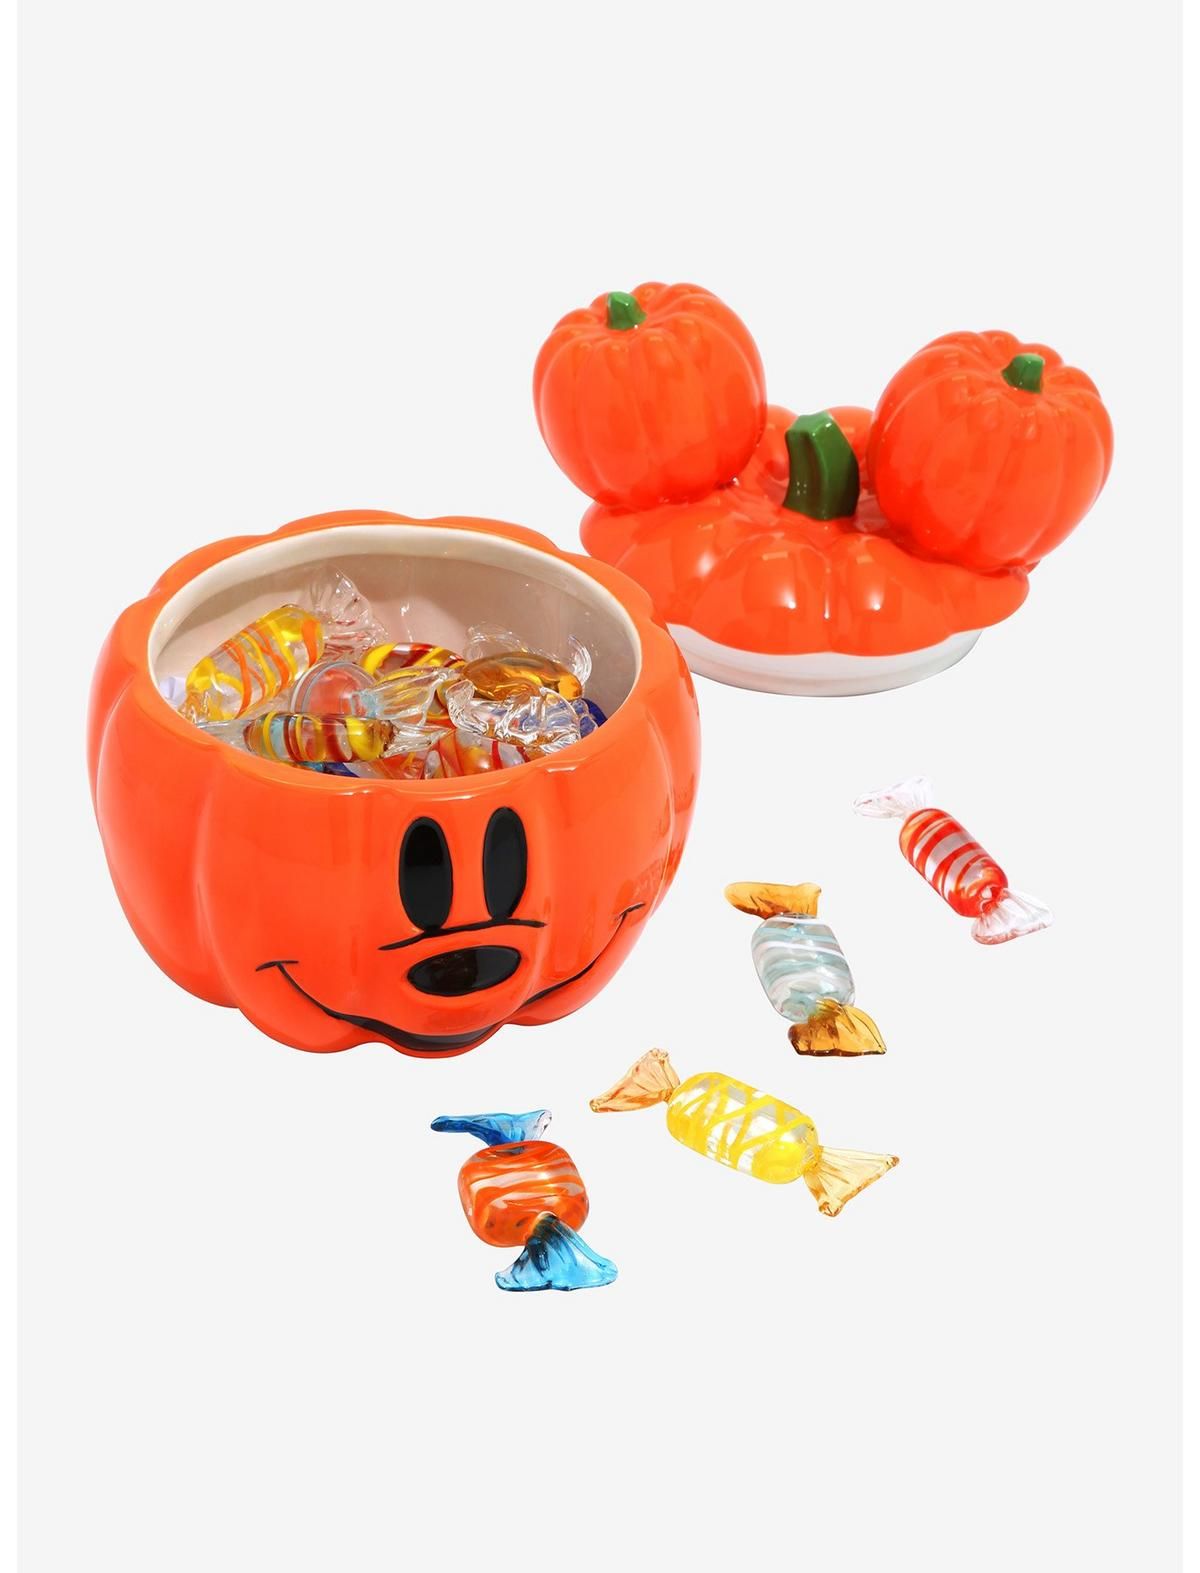 Disney Mickey Mouse Pumpkin Candy Bowl Hot Topic Exclusive | Hot Topic | Hot Topic